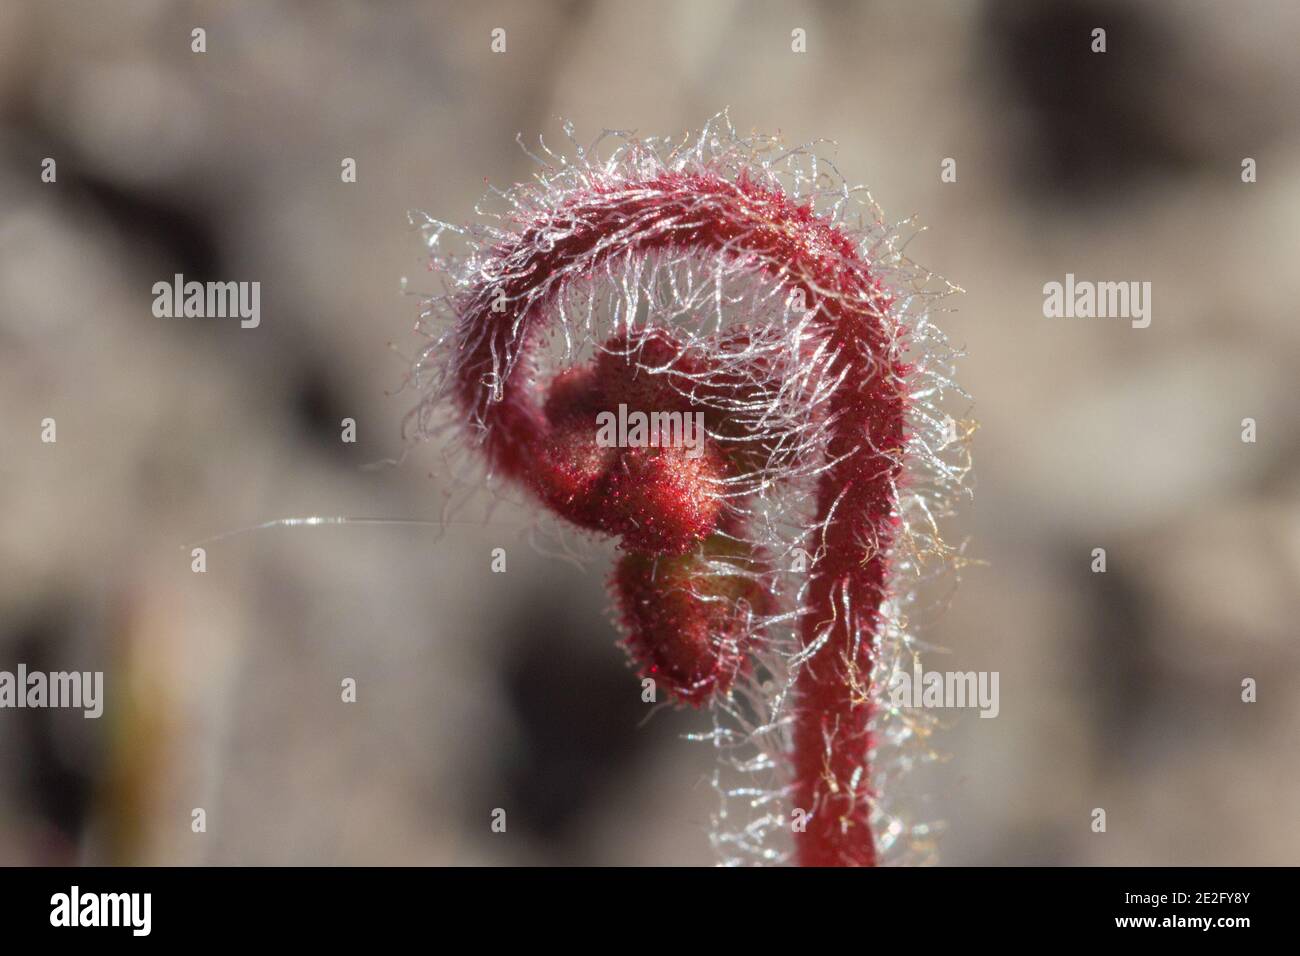 The hairy flower of the carnivorous plant Drosera tomentosa var. tomentosa found in the Serra do Cipo National Park in Minas Gerais, Brazil Stock Photo